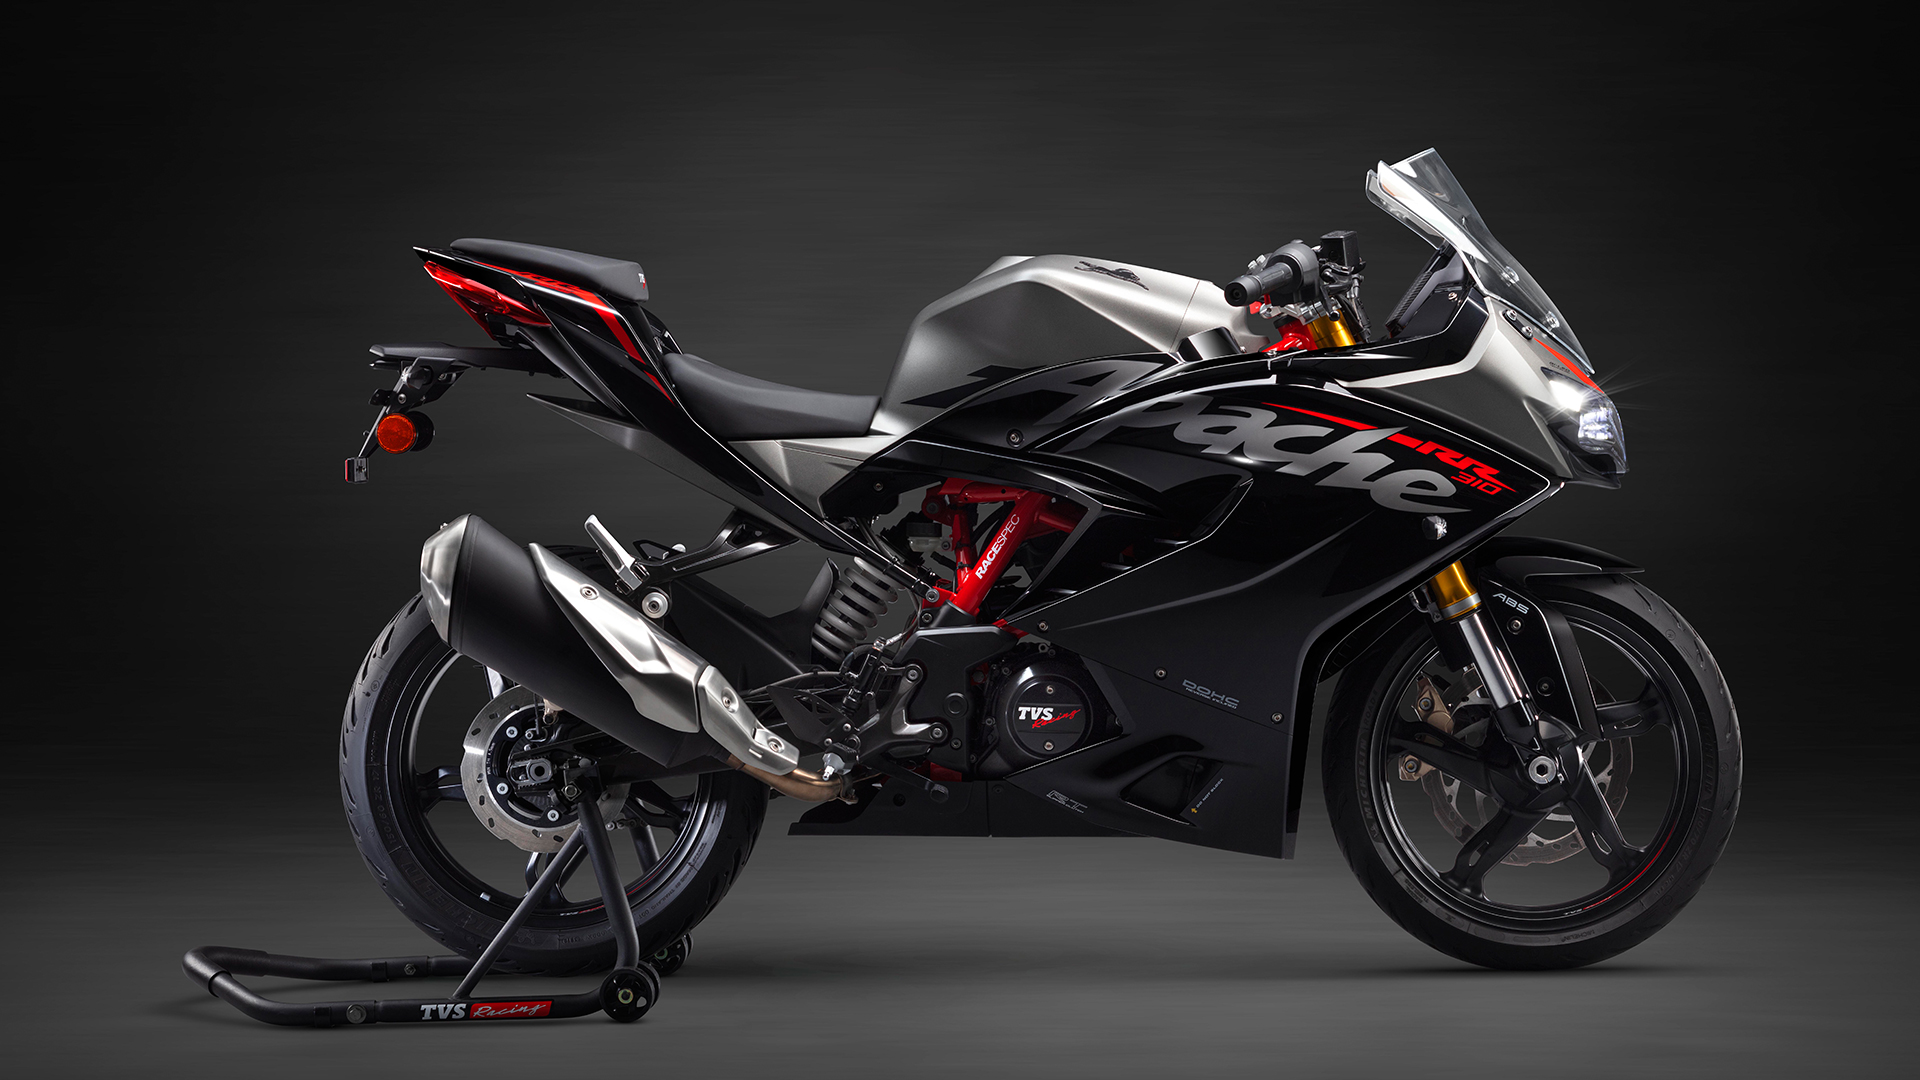 Tvs Apache Rr 310 Price Mileage Reviews Specification Gallery Overdrive